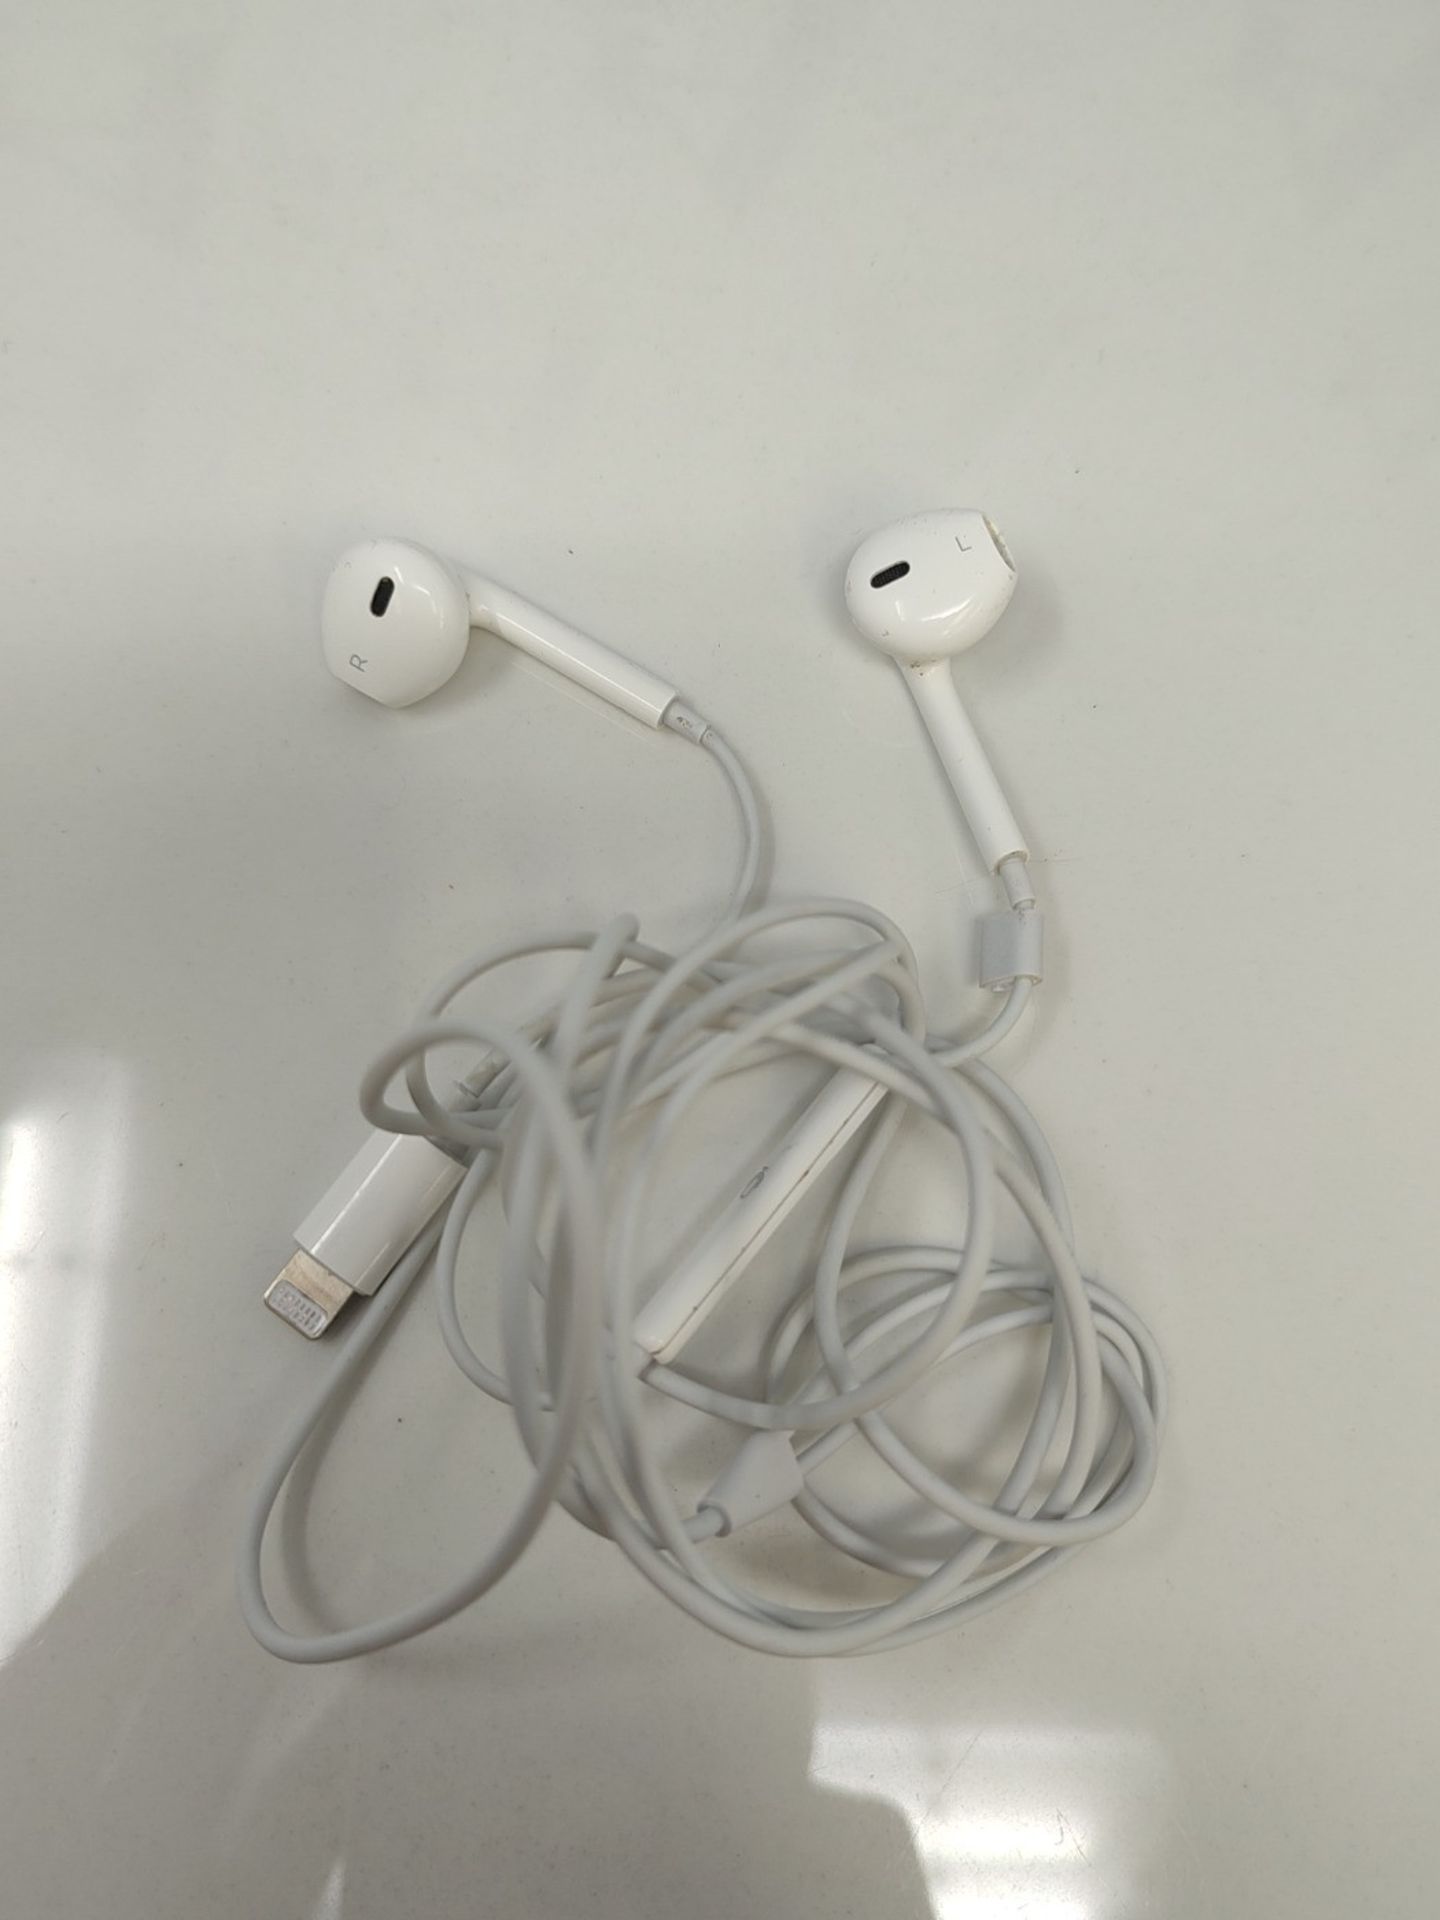 Apple EarPods with Lightning connector - Image 2 of 2